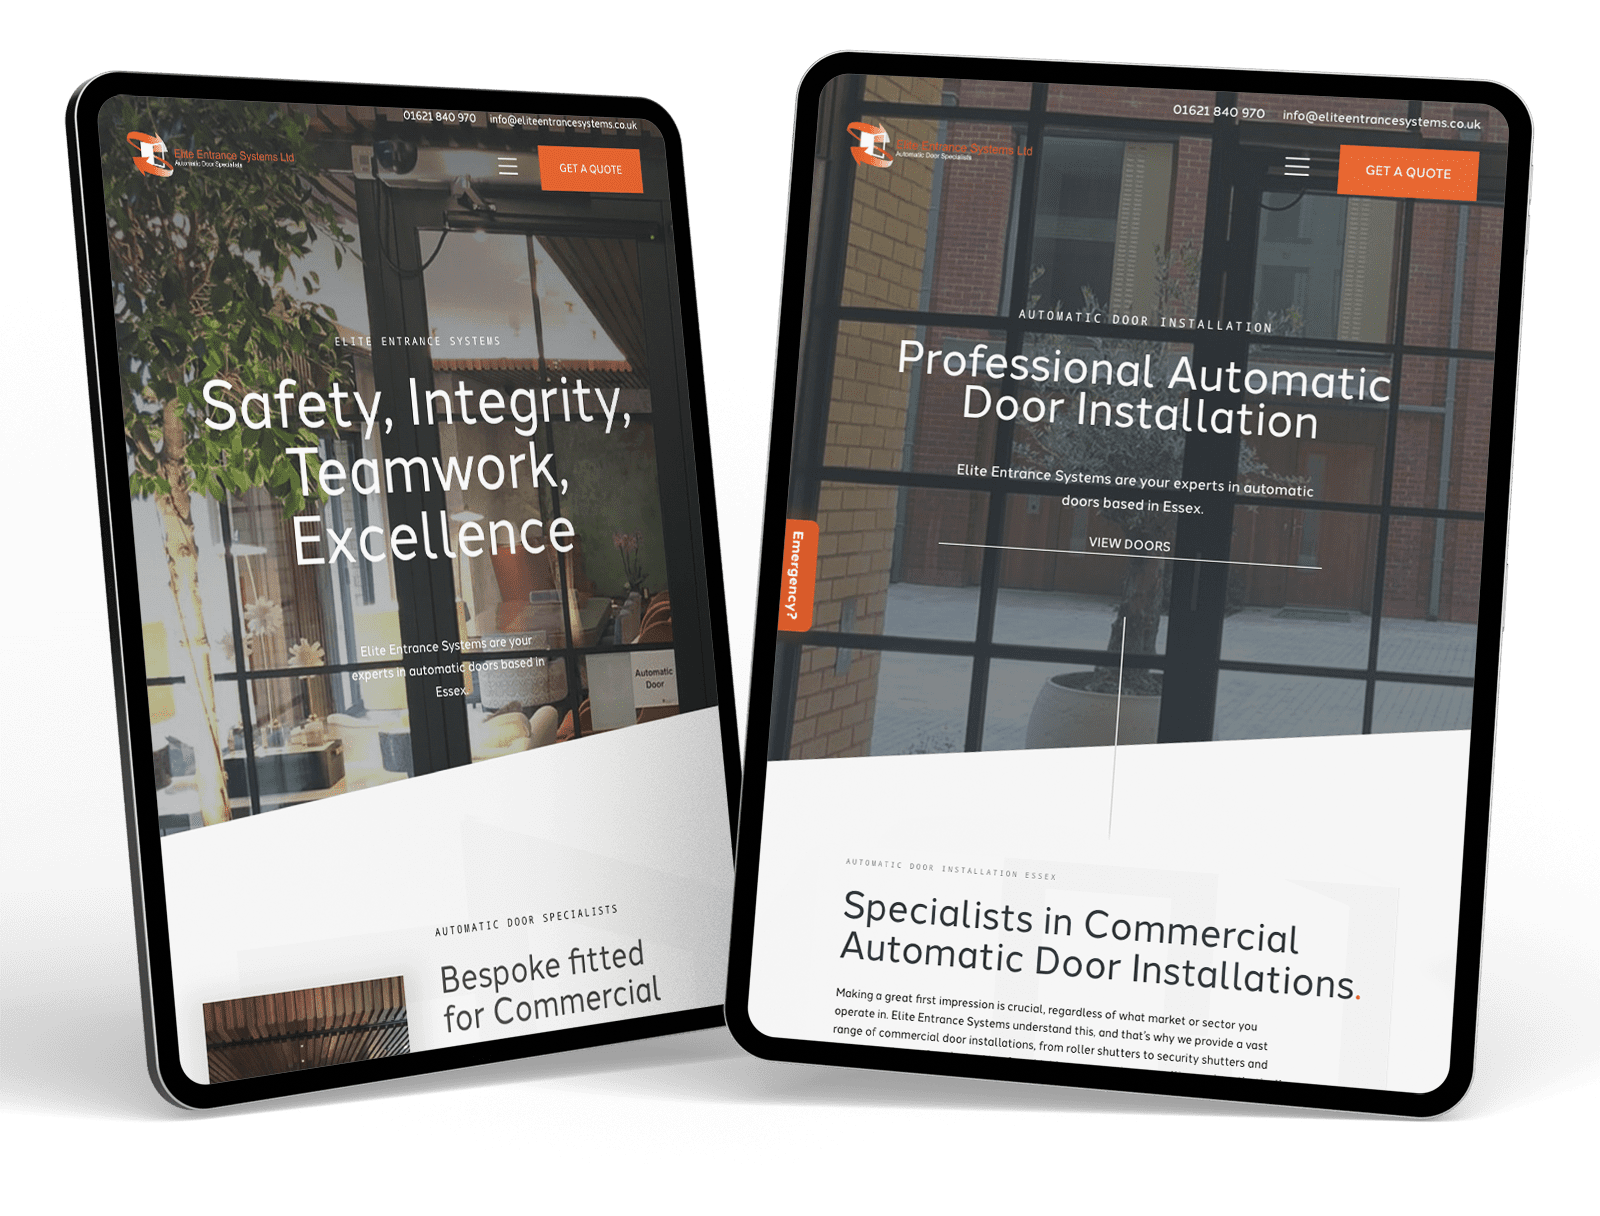 Two ipads showcasing the safety integrity and door excellence website designed by a freelance web designer in Essex.